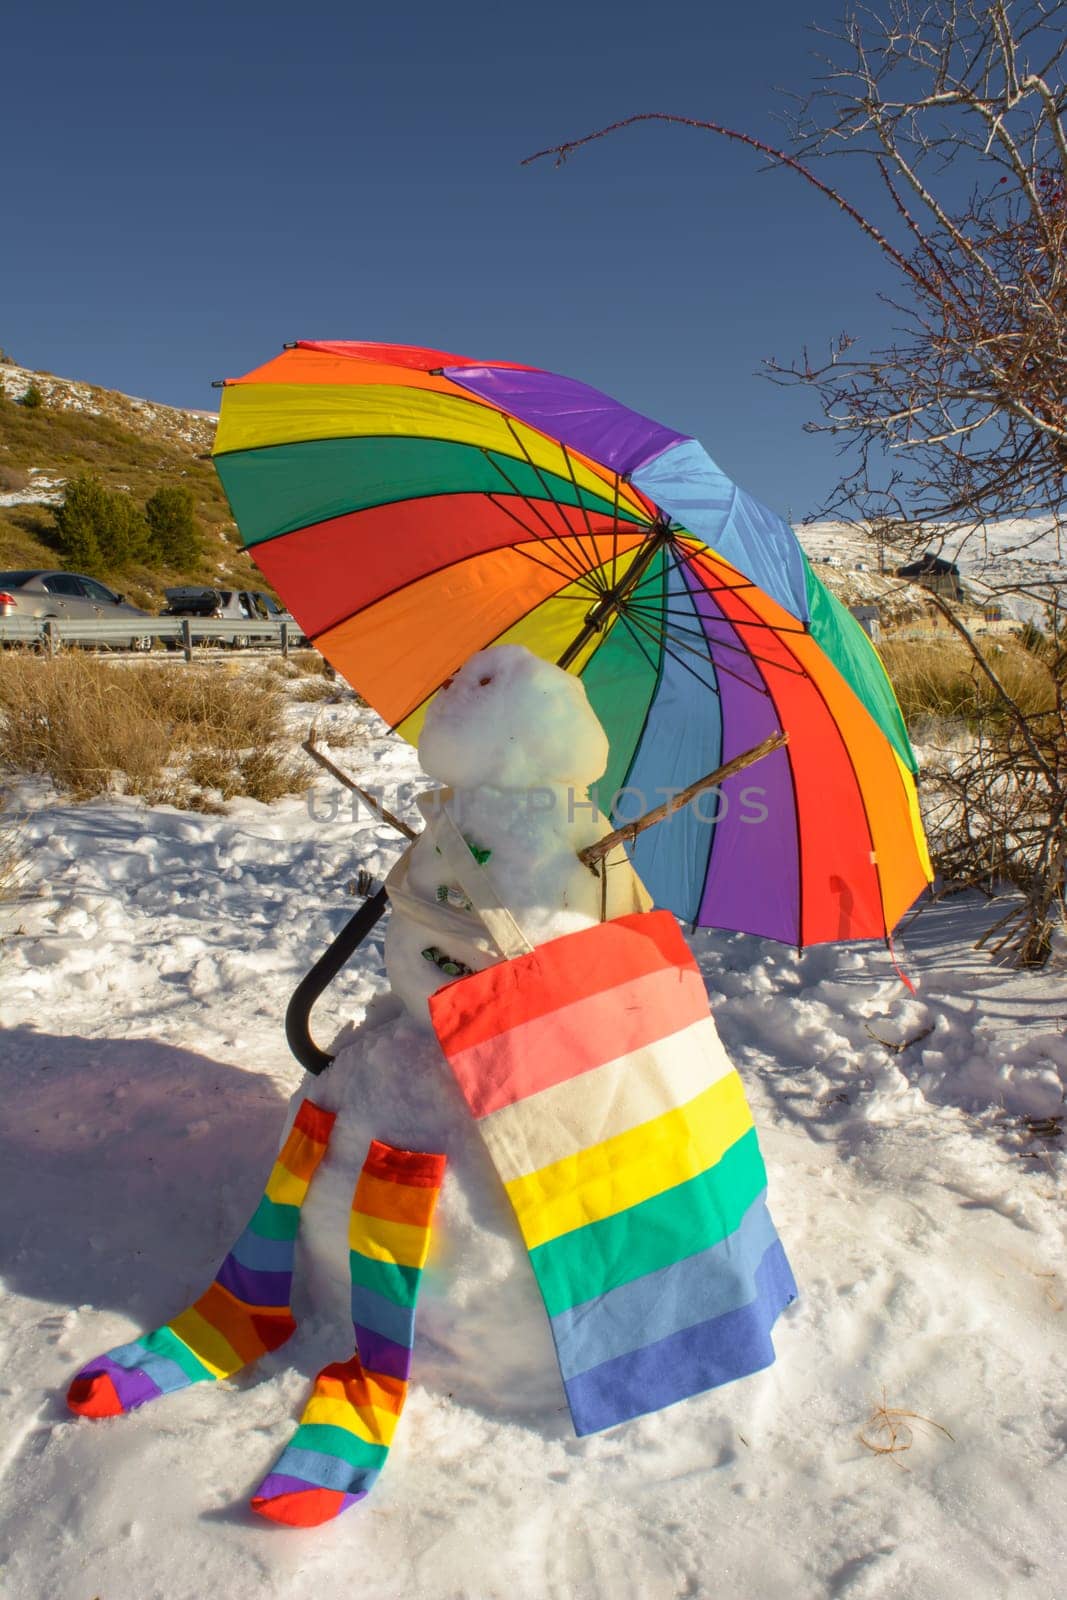 profile view, of snowman with colorful accessories of the lgtb pride, in sierra nevada,granada,andalucia,spain.lgtb community,